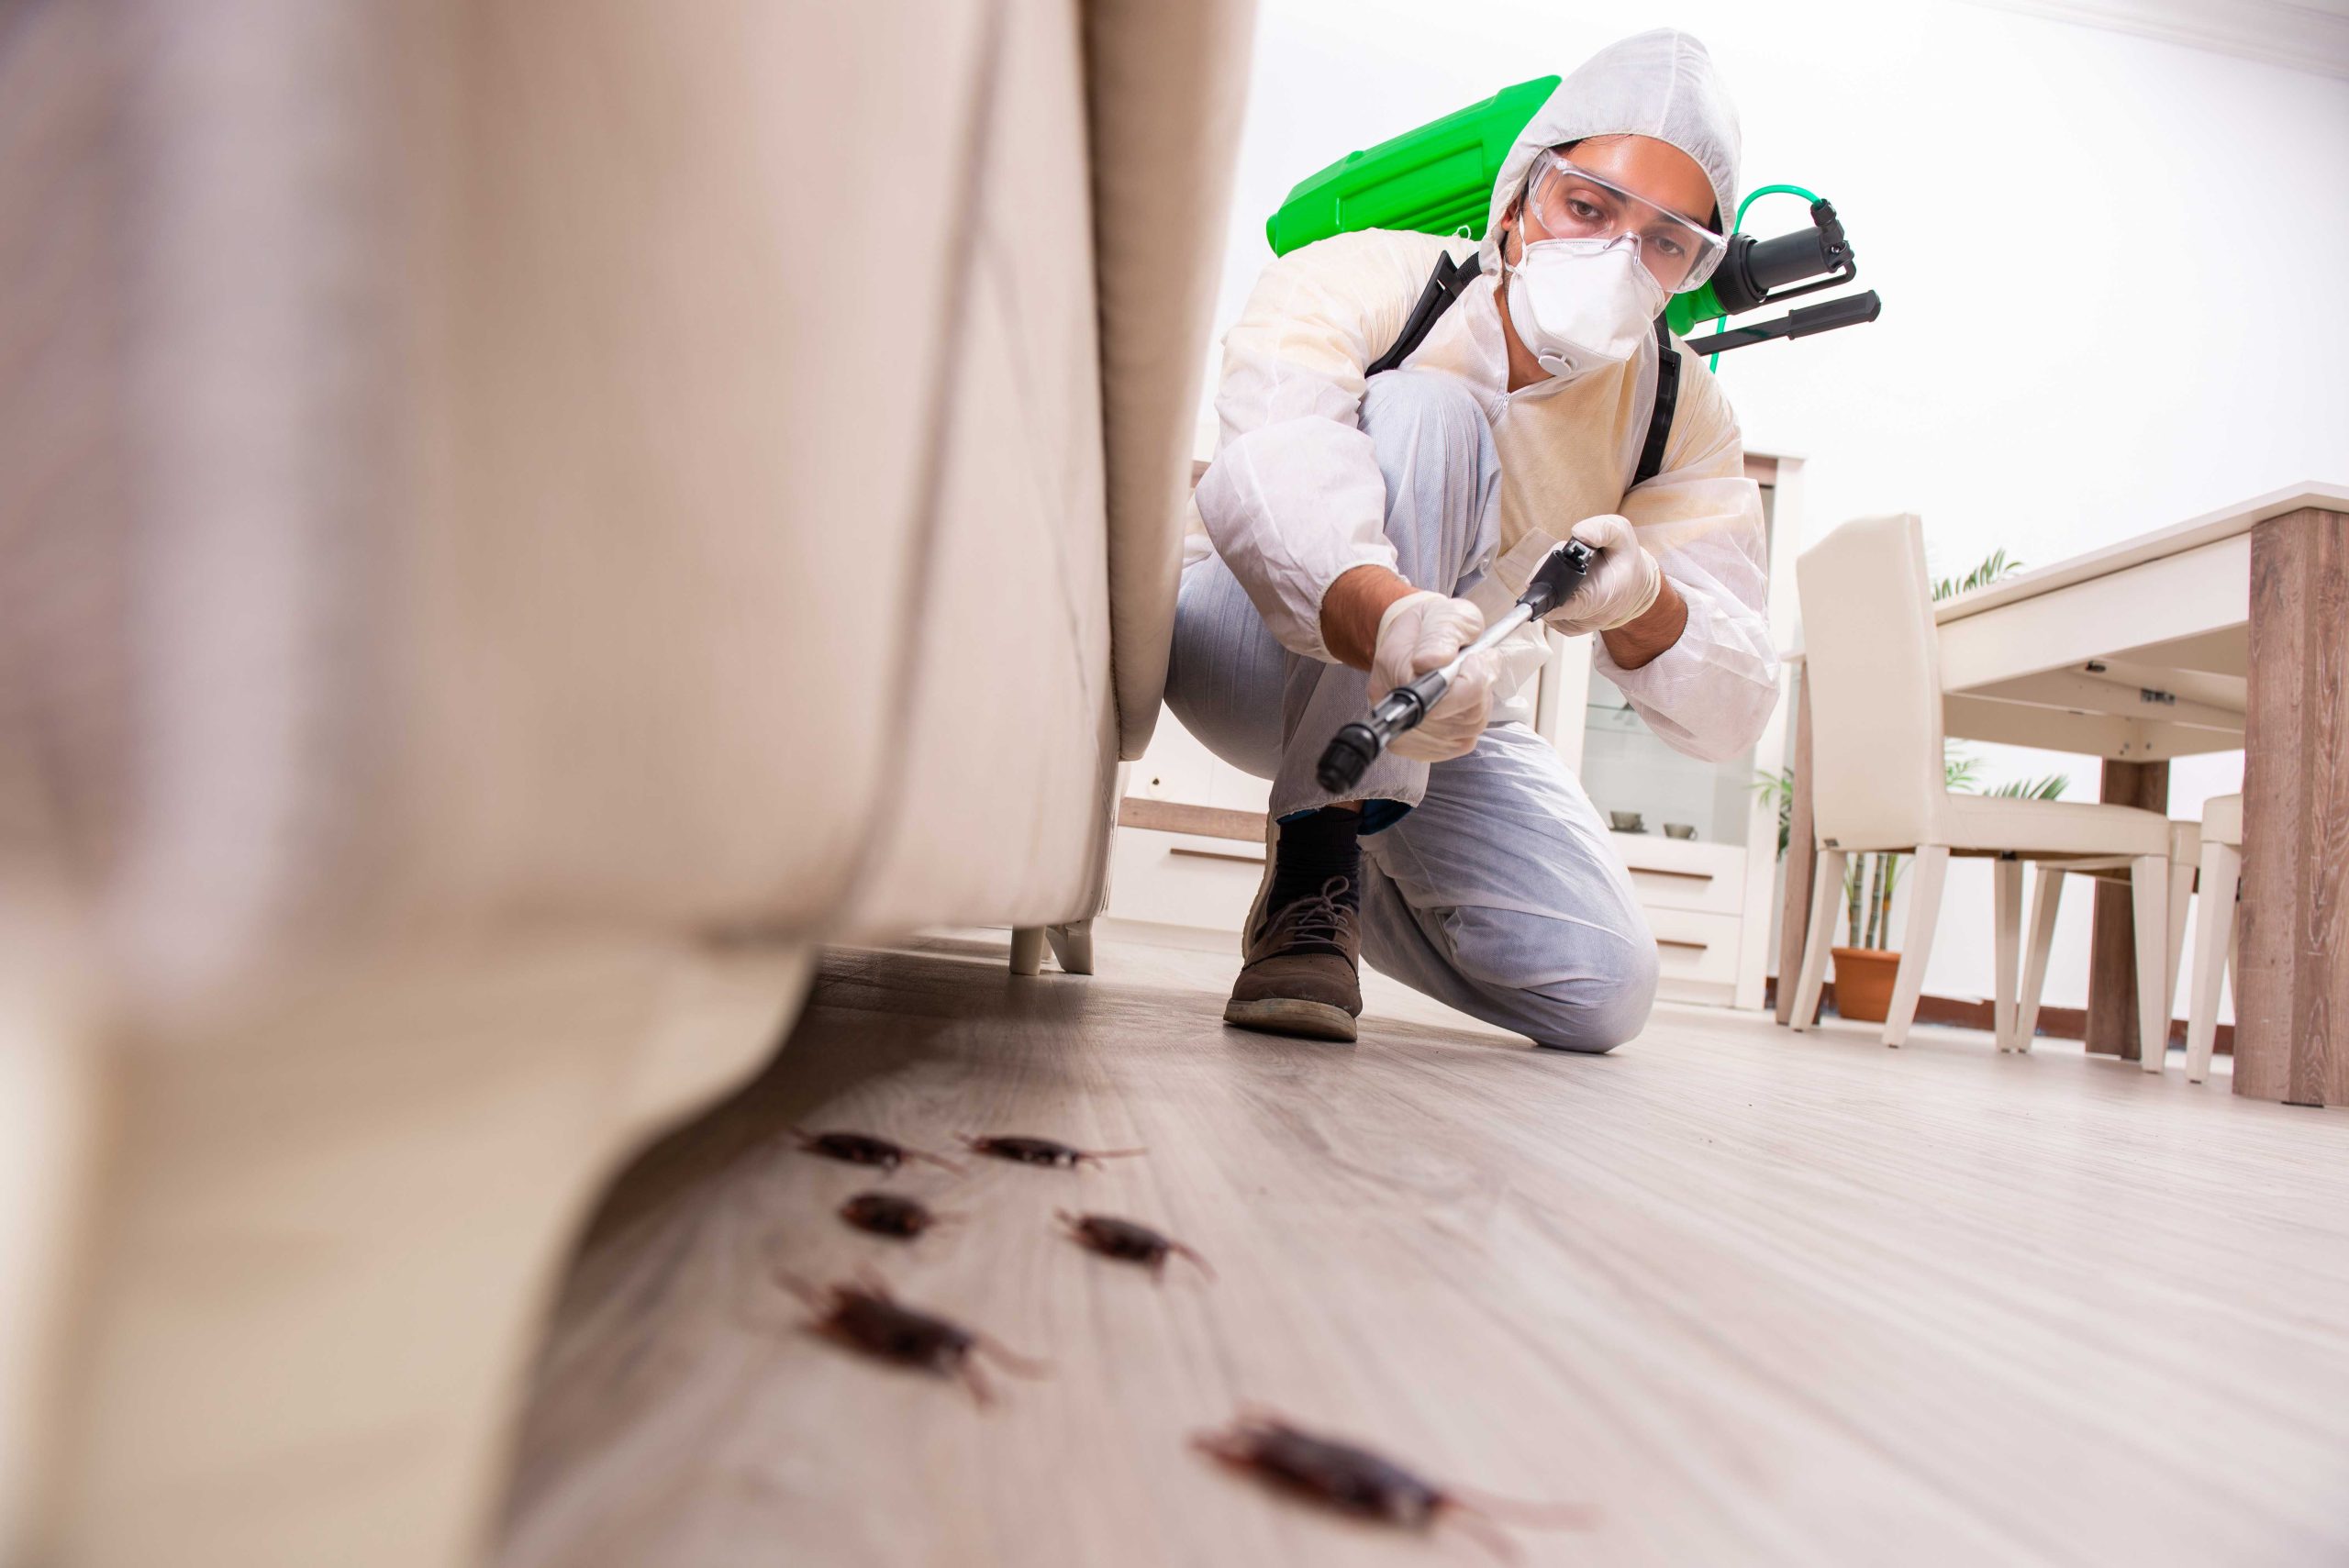 Pest-Control experts in Salt Lake City specializing in prevention and eradication of various pests. Don't let pests damage your property and endanger your health.